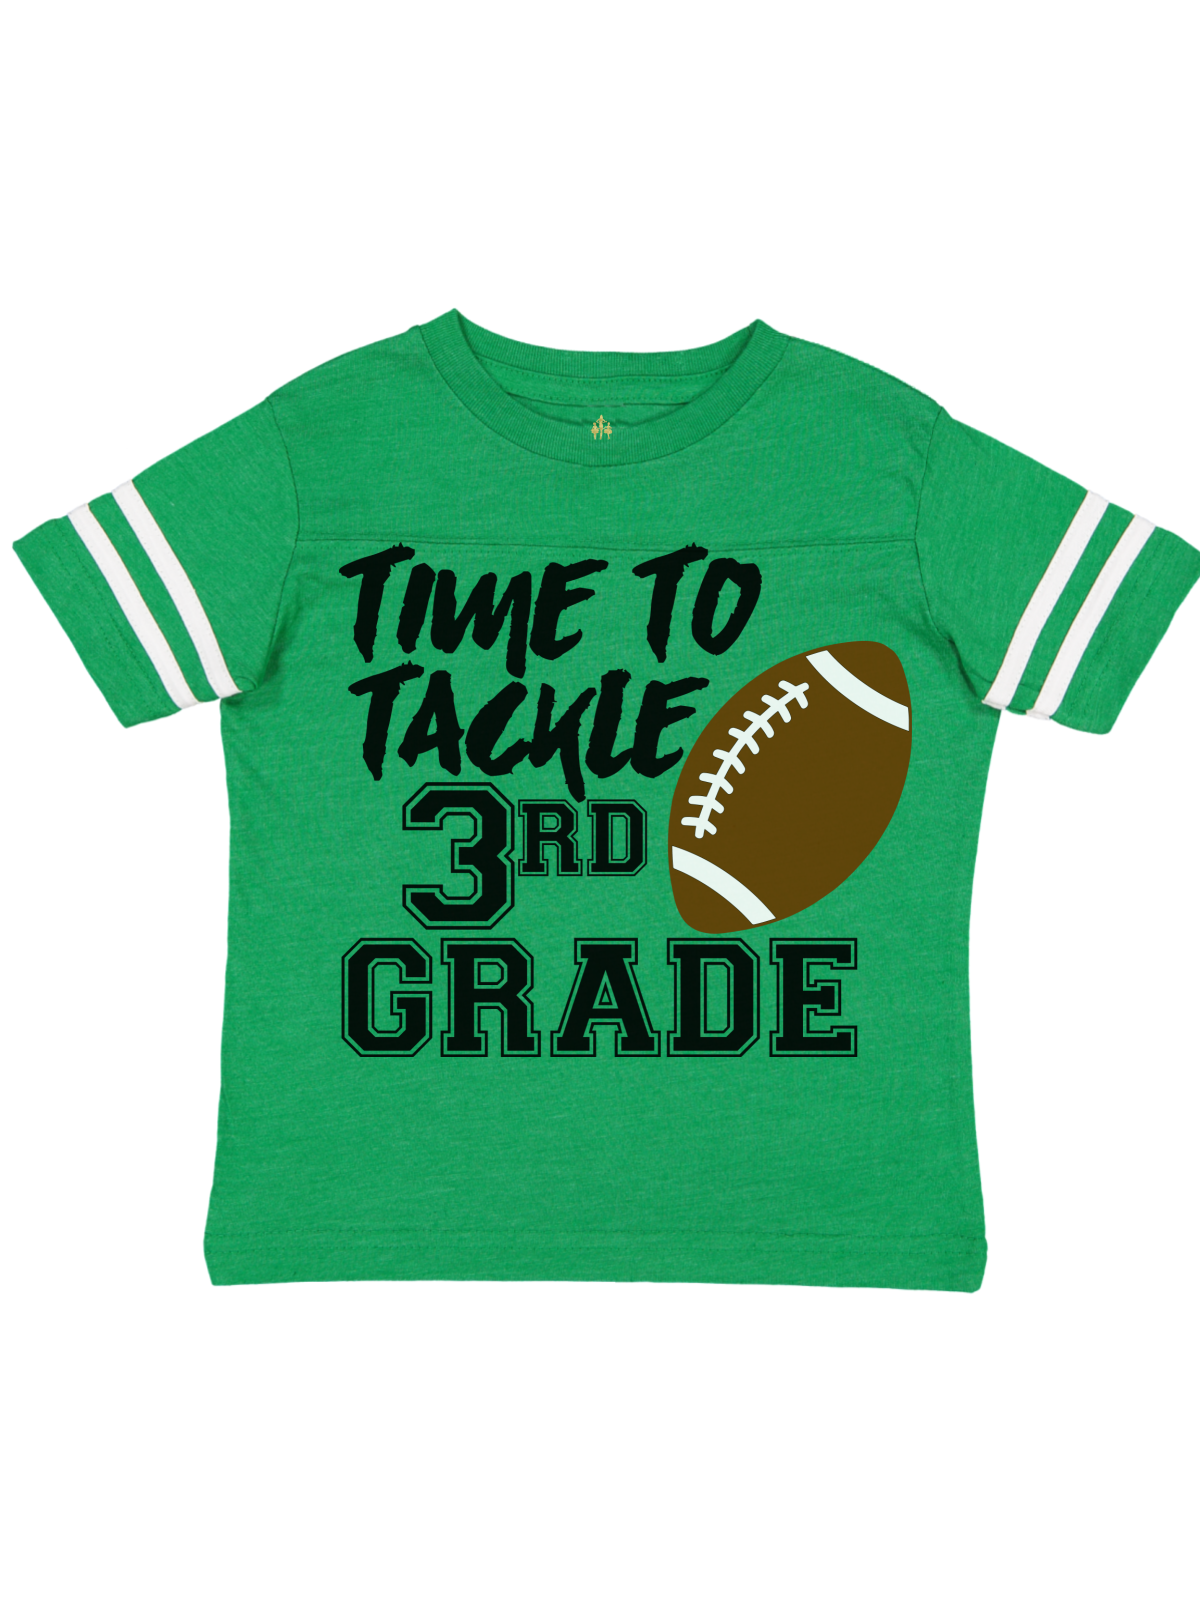 Time to Tackle 3rd Grade Boys Football Shirt in Green and White